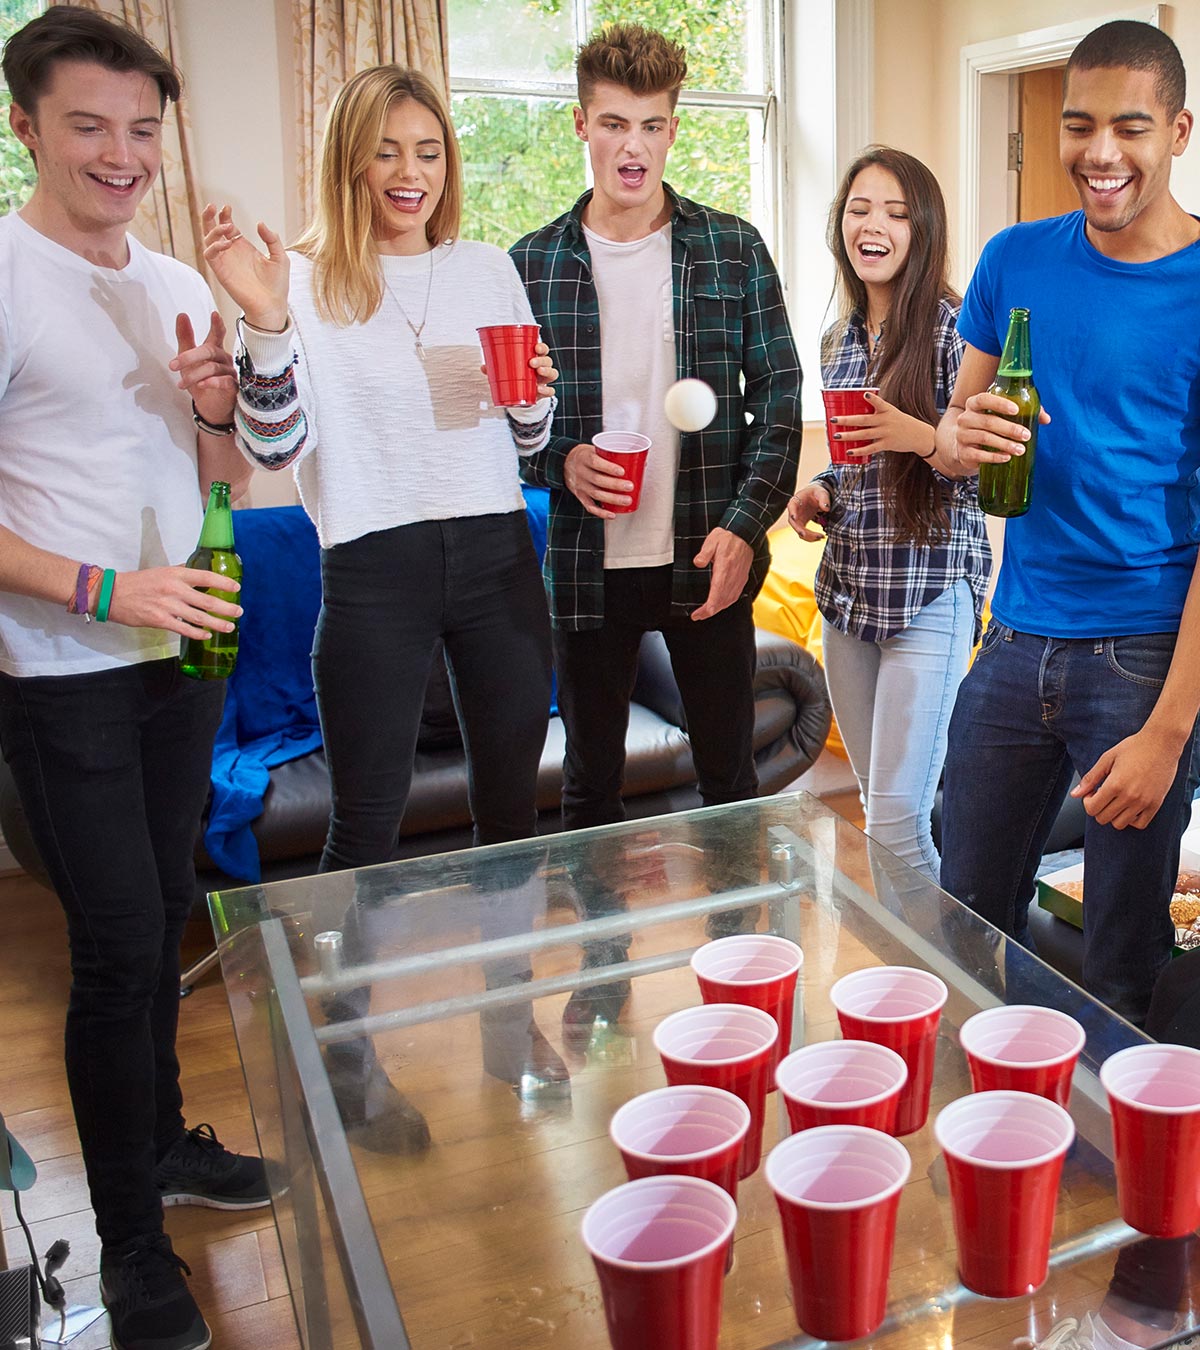 11 Interesting And Fun Things To Do With Teens On Weekend